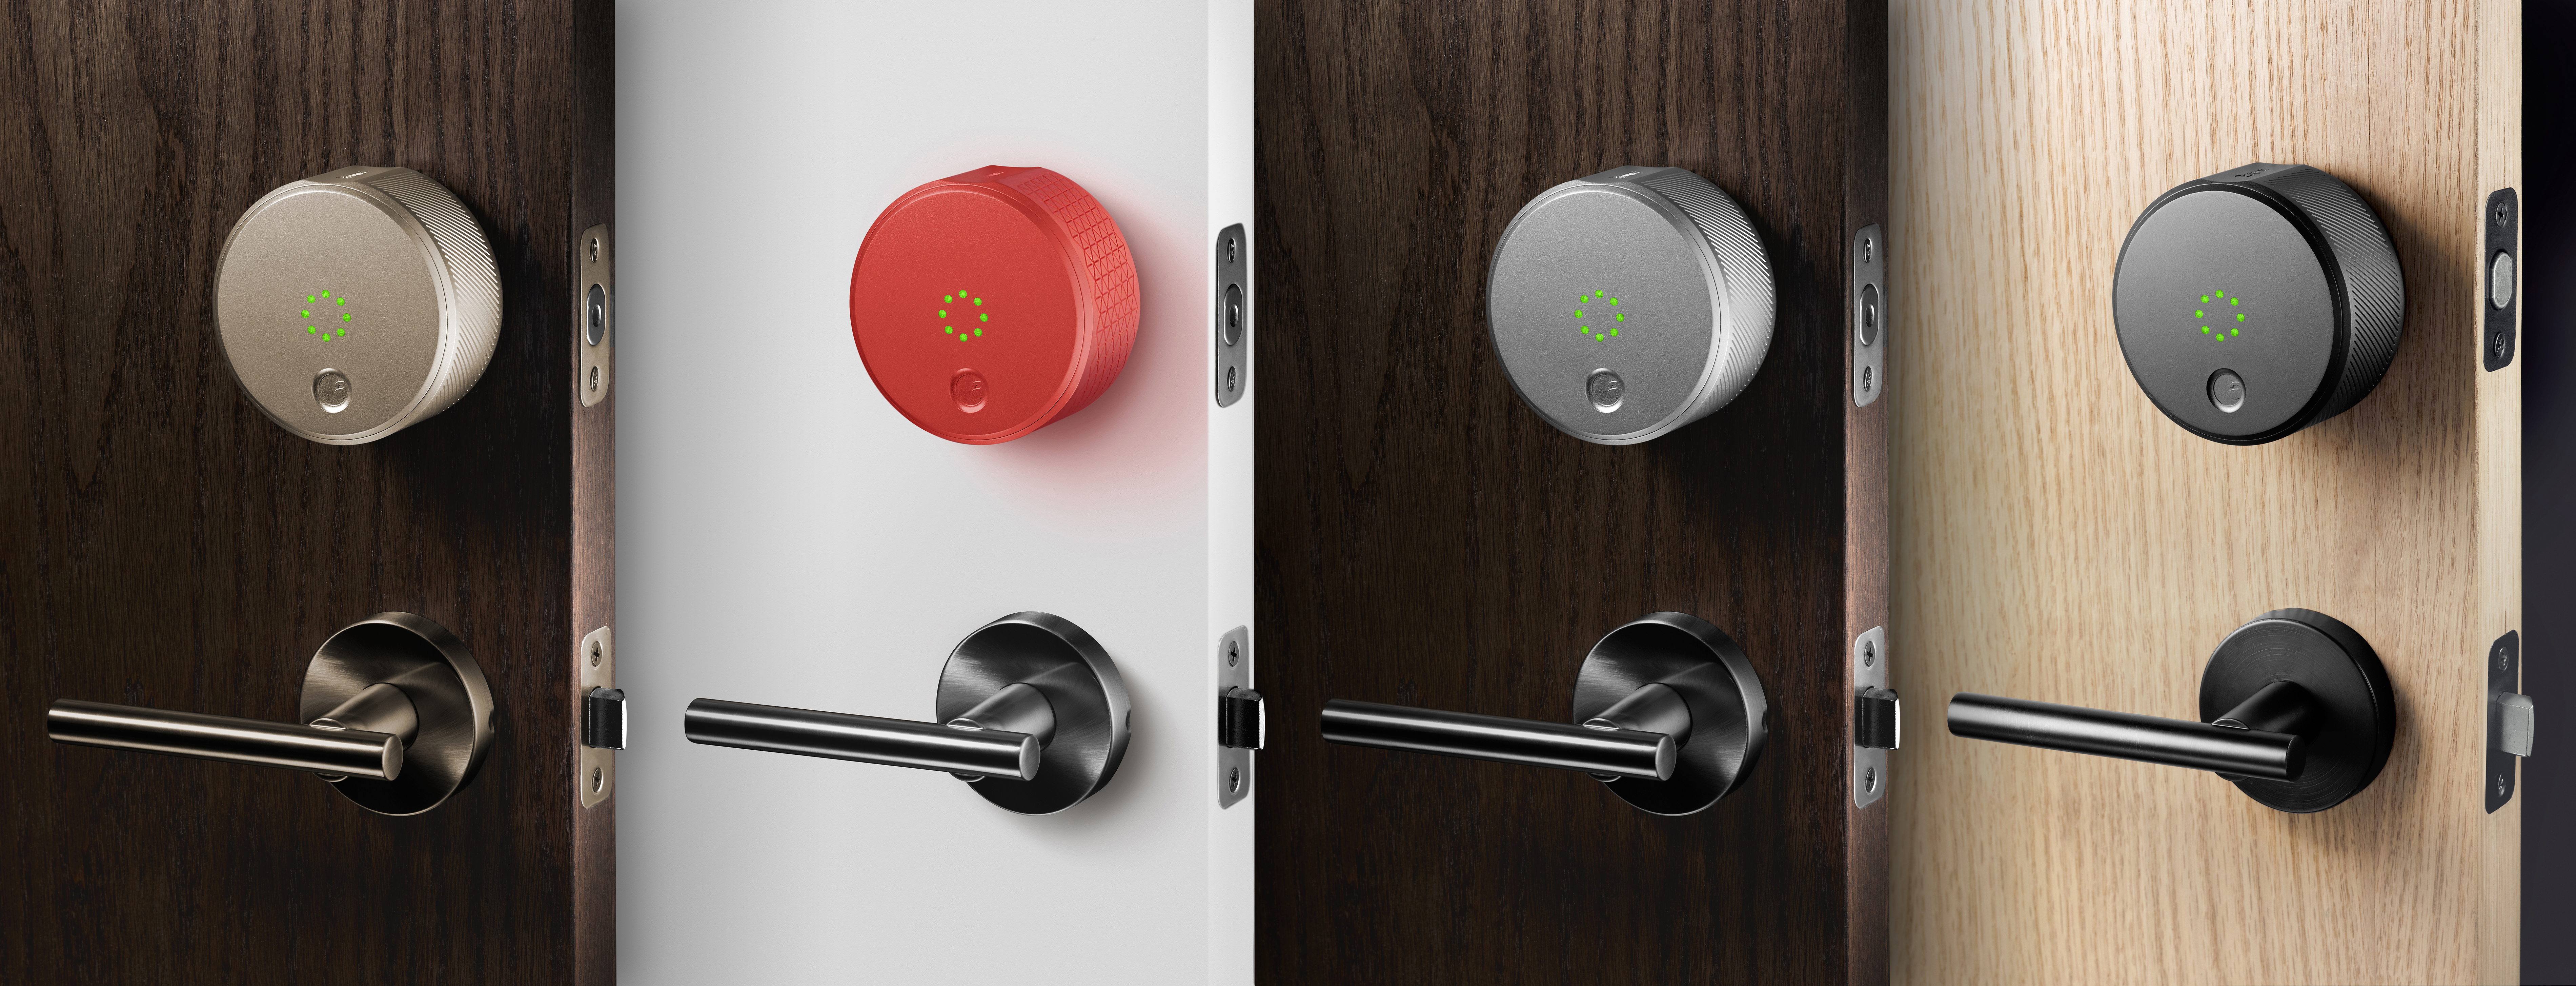 The August smart Lock